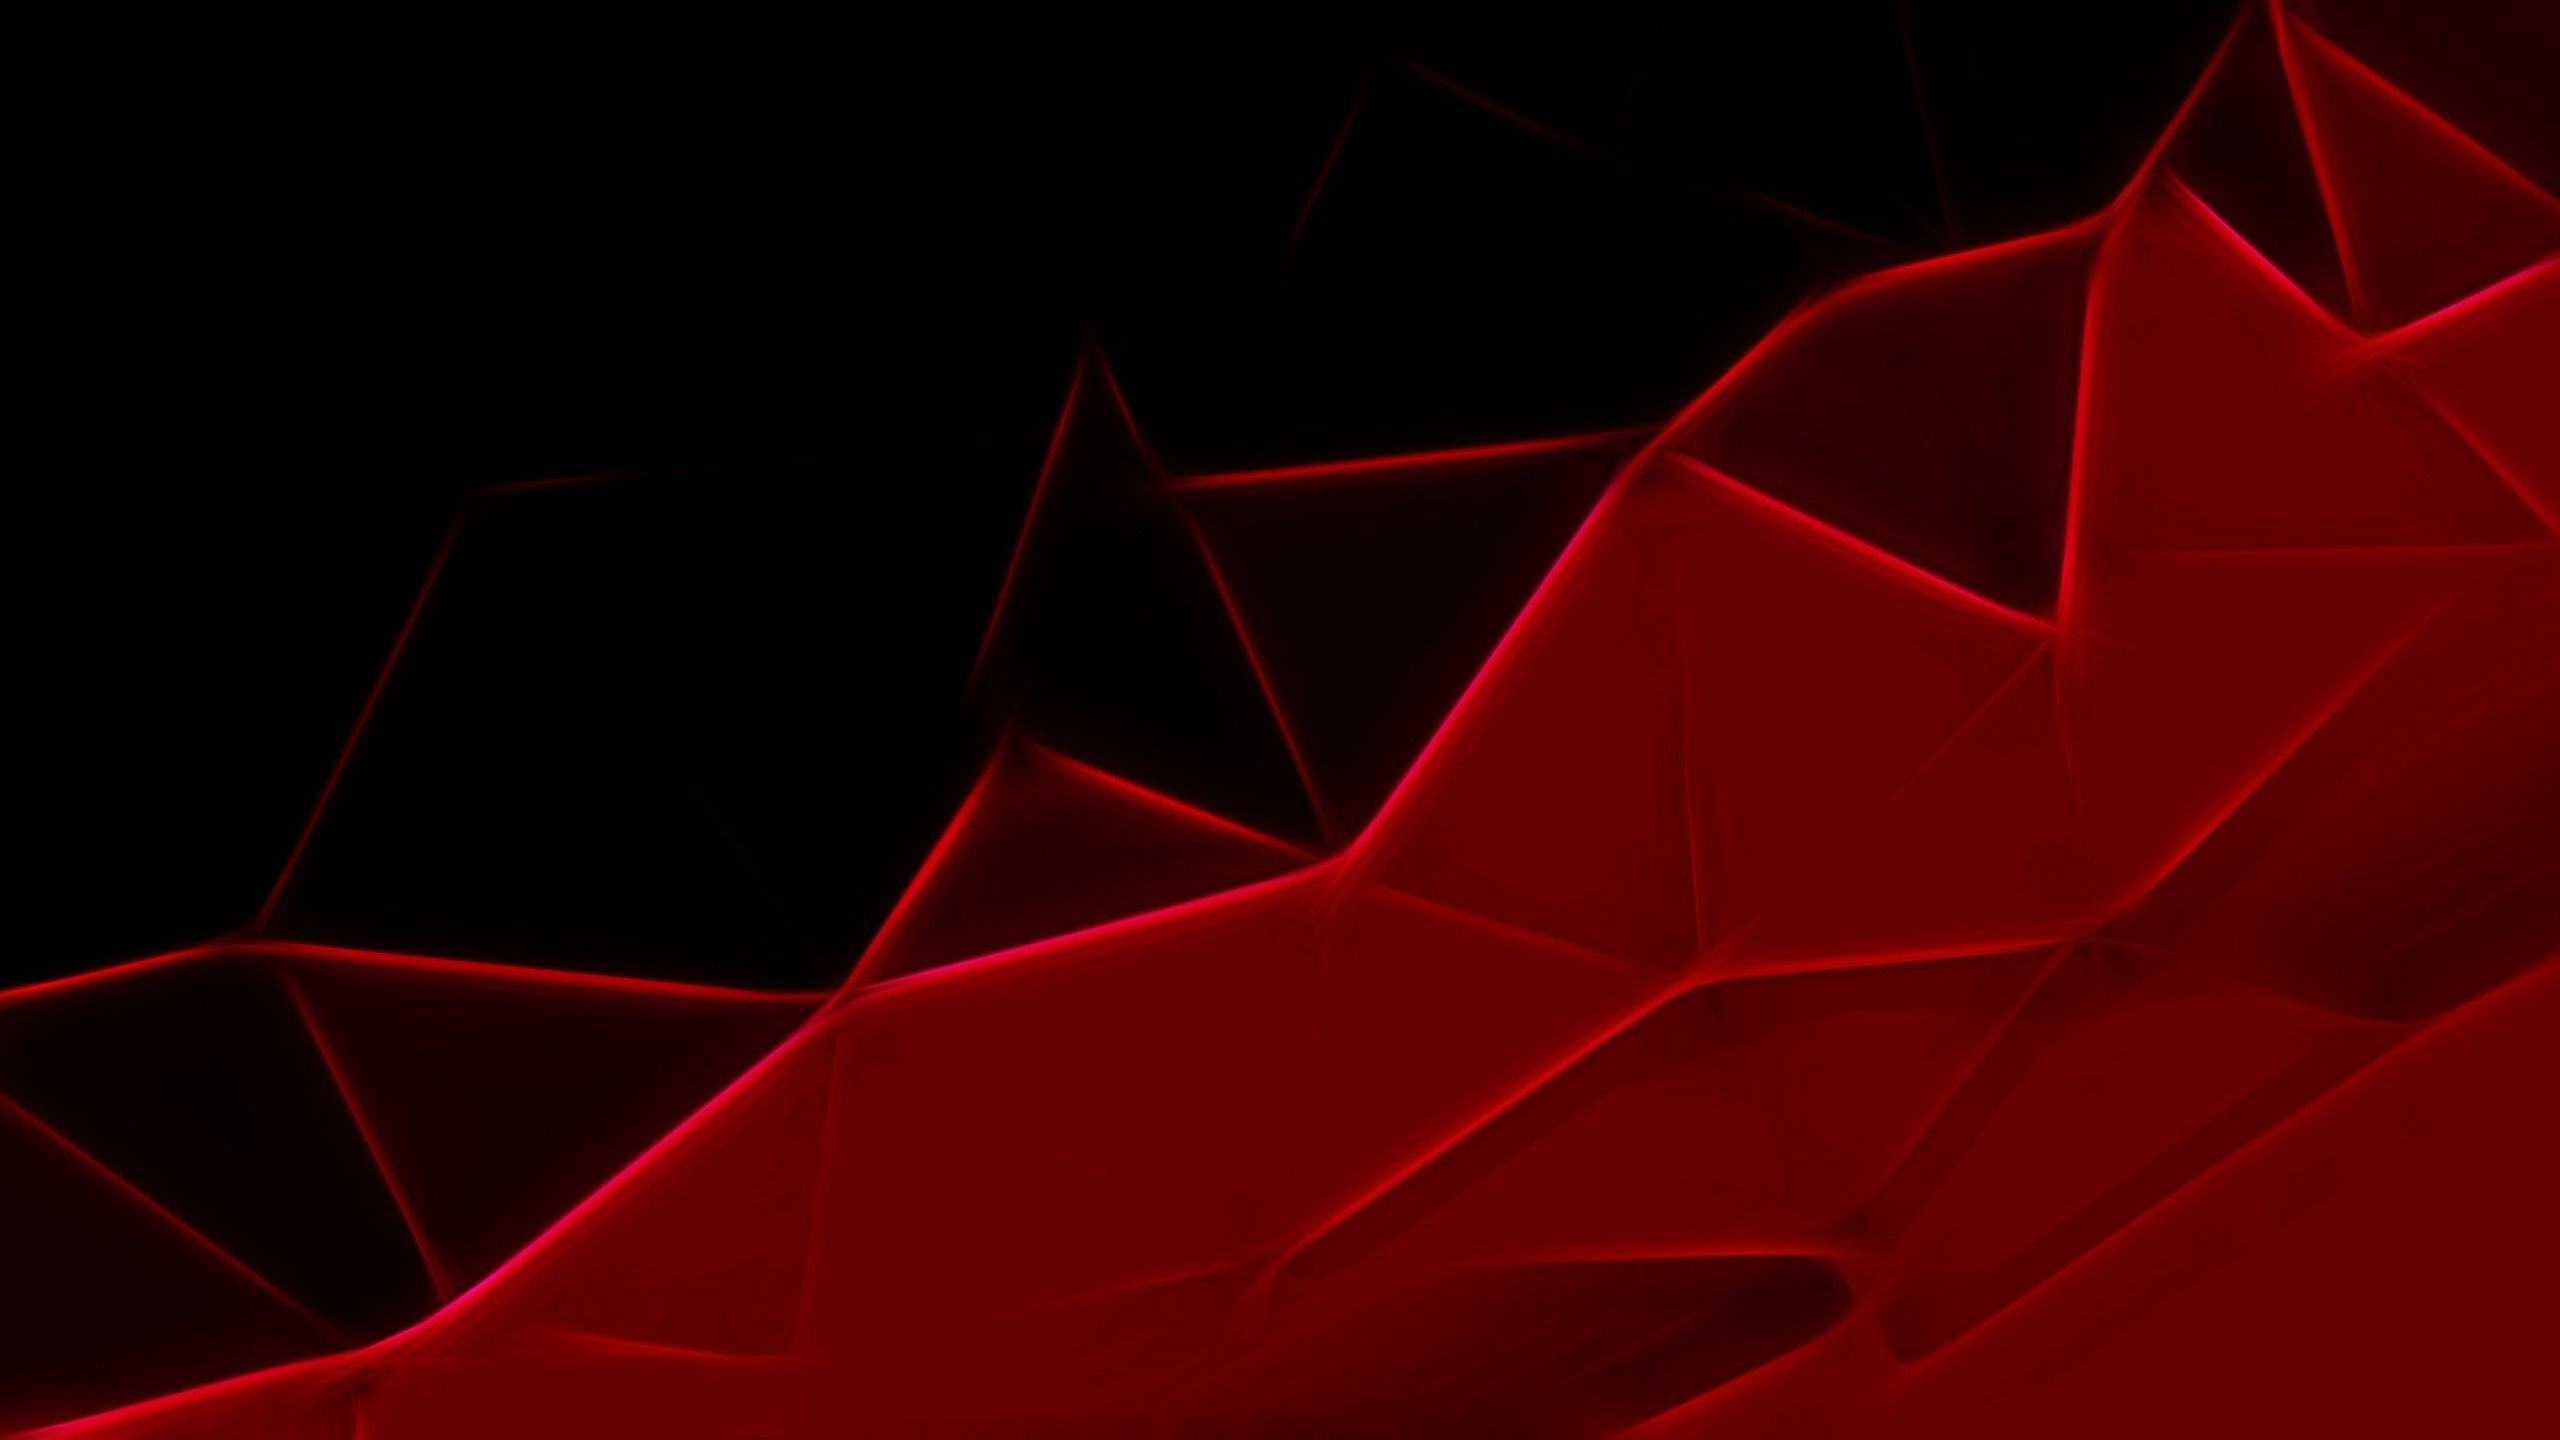 Download 2560x1440 Red Triangles, Geometric Wallpaper for iMac 27